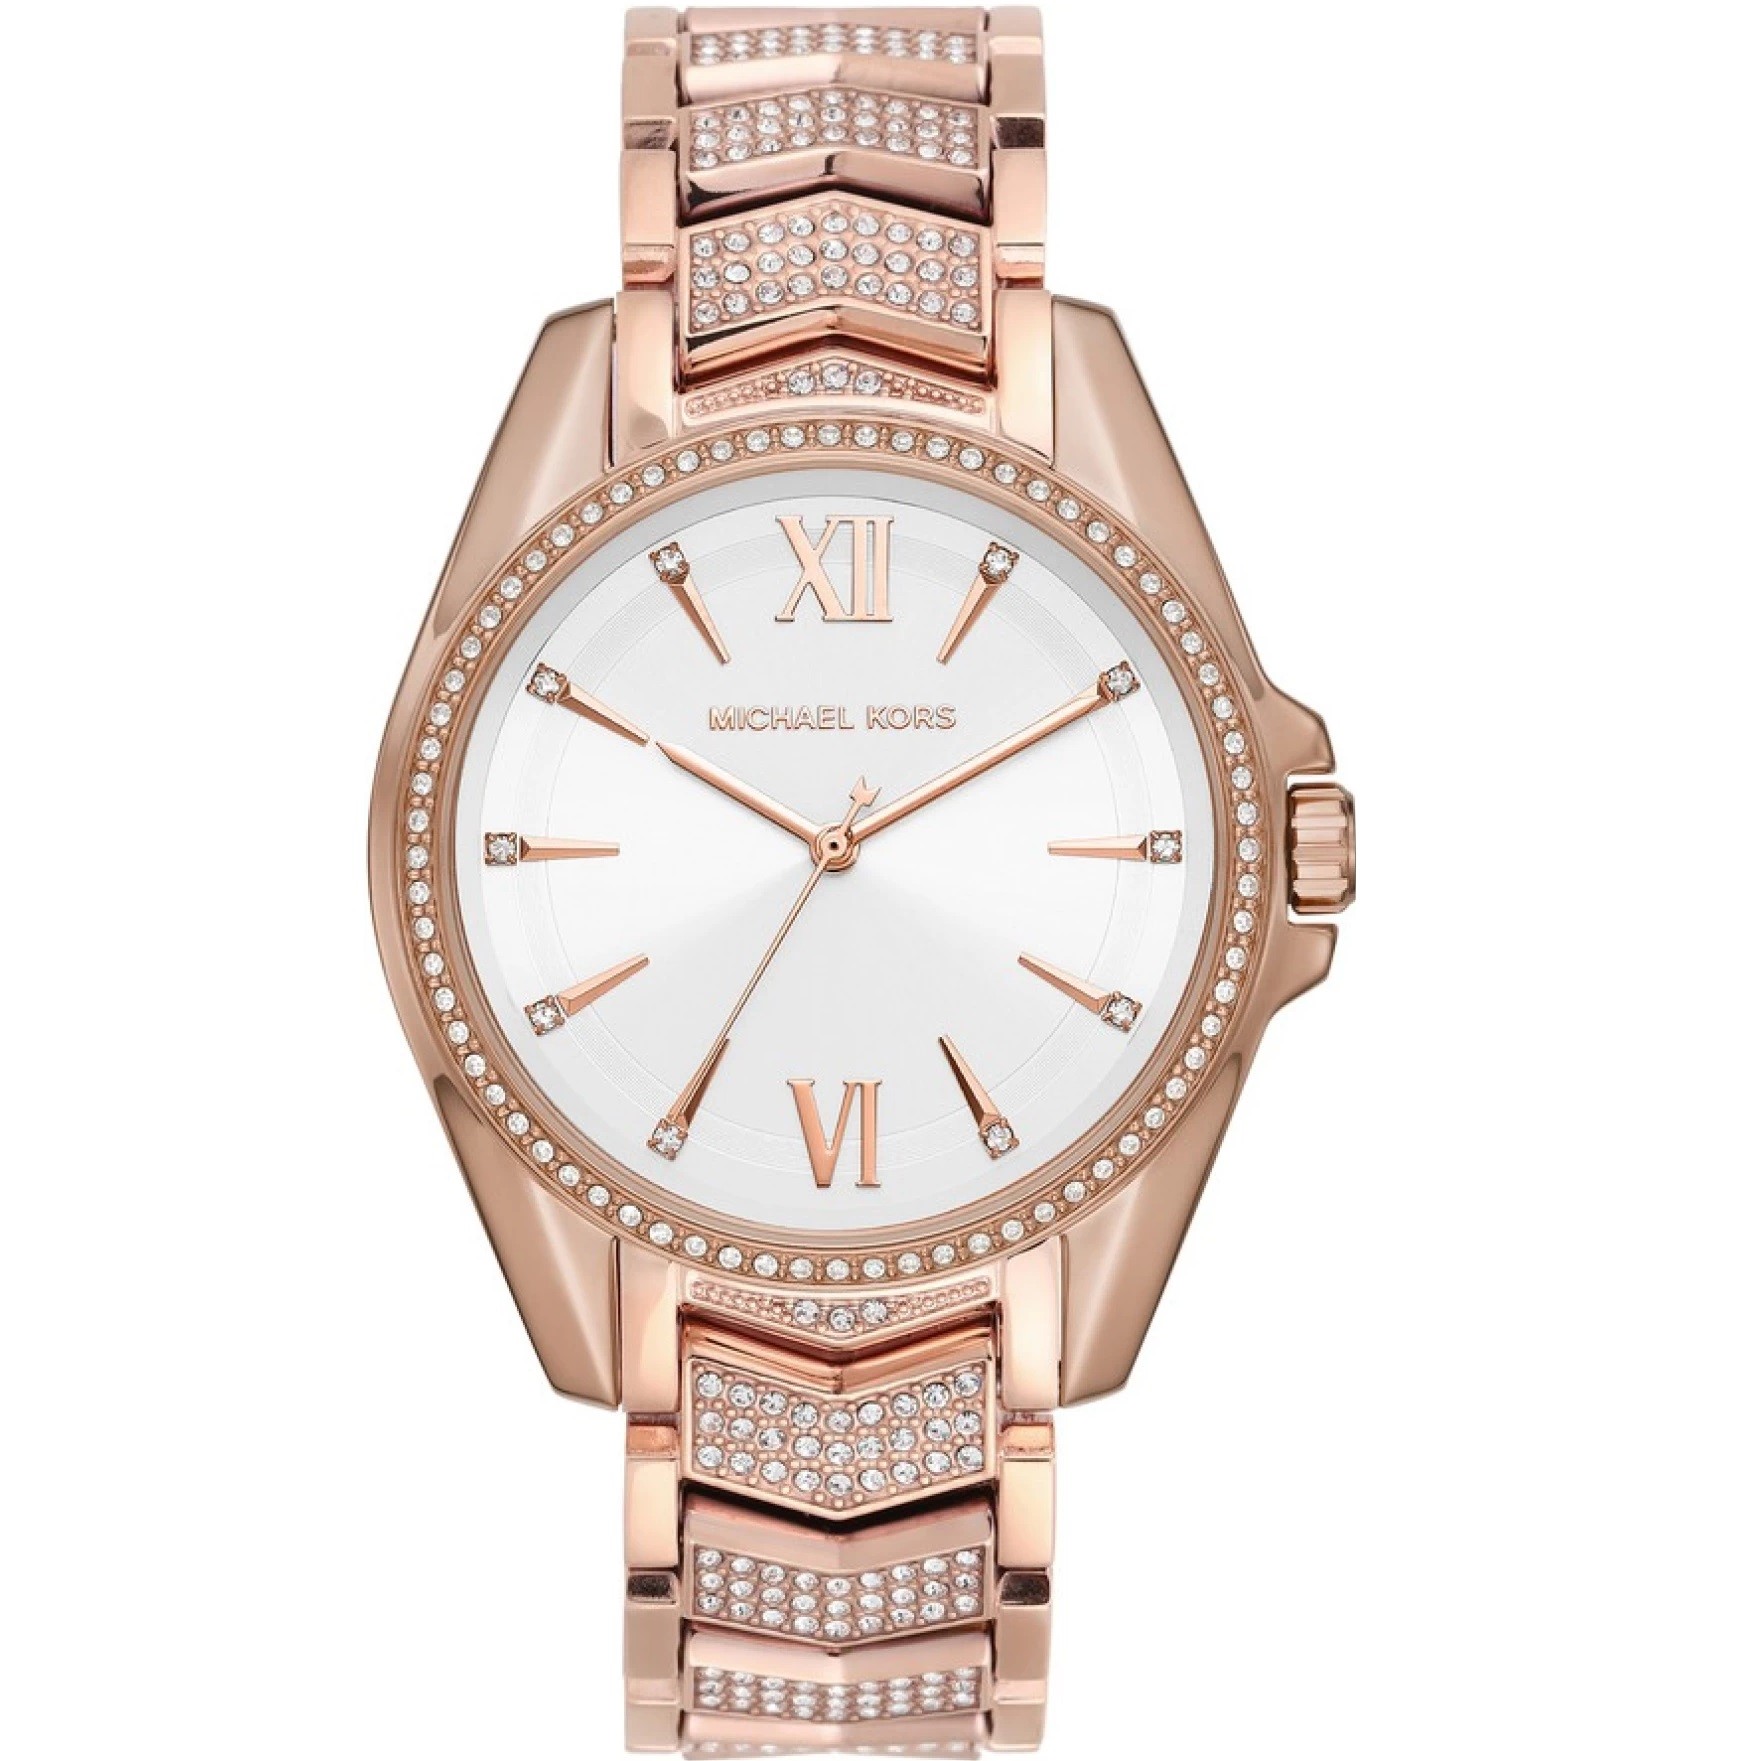 ĐỒNG HỒ NỮ MICHAEL KORS WHITNEY STAINLESS STEEL ANALOGUE WATCH MK6858 4